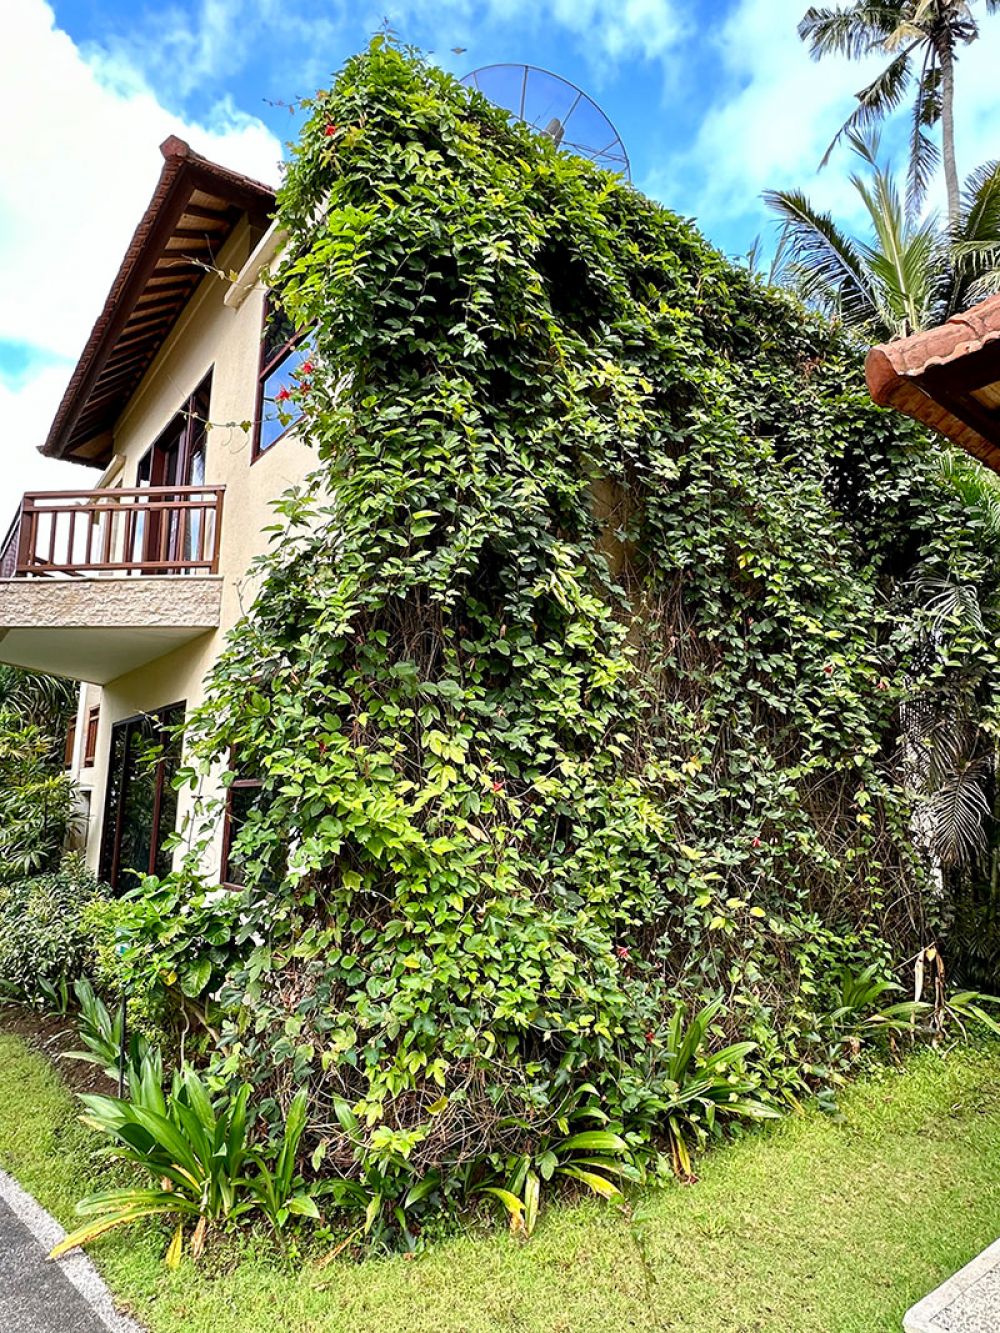 Discovery Candidasa Cottages And Villas 4*